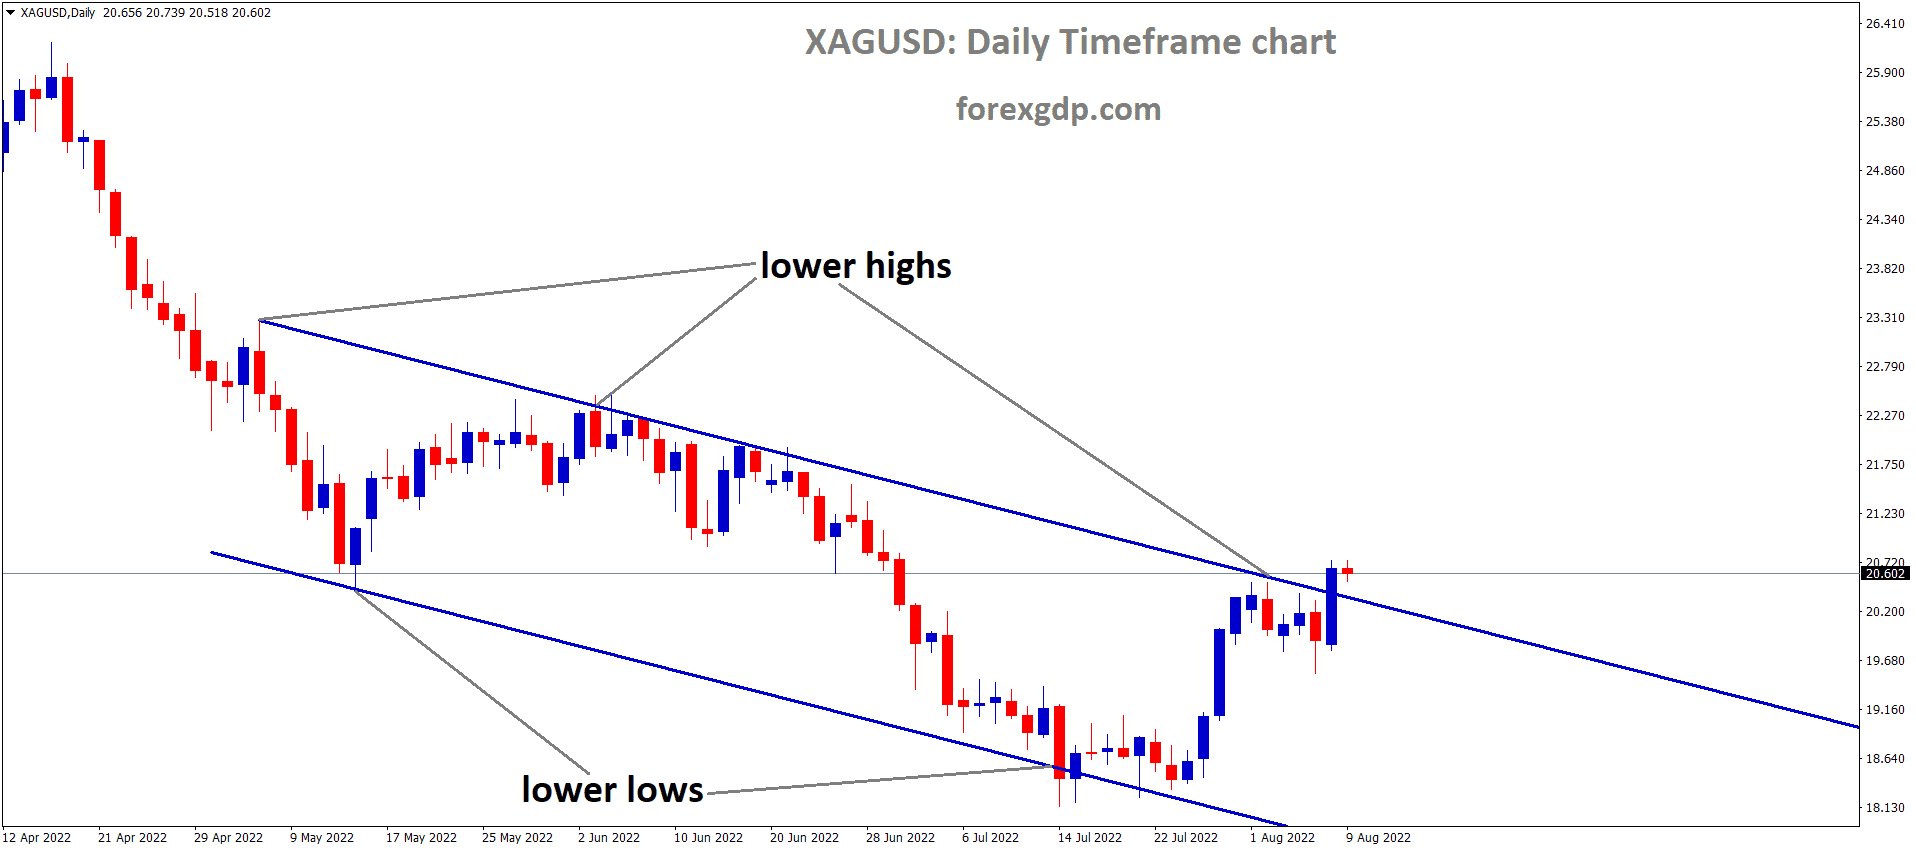 XAGUSD Silver price is moving in the Descending channel and the market has reached the Lower high area of the channel